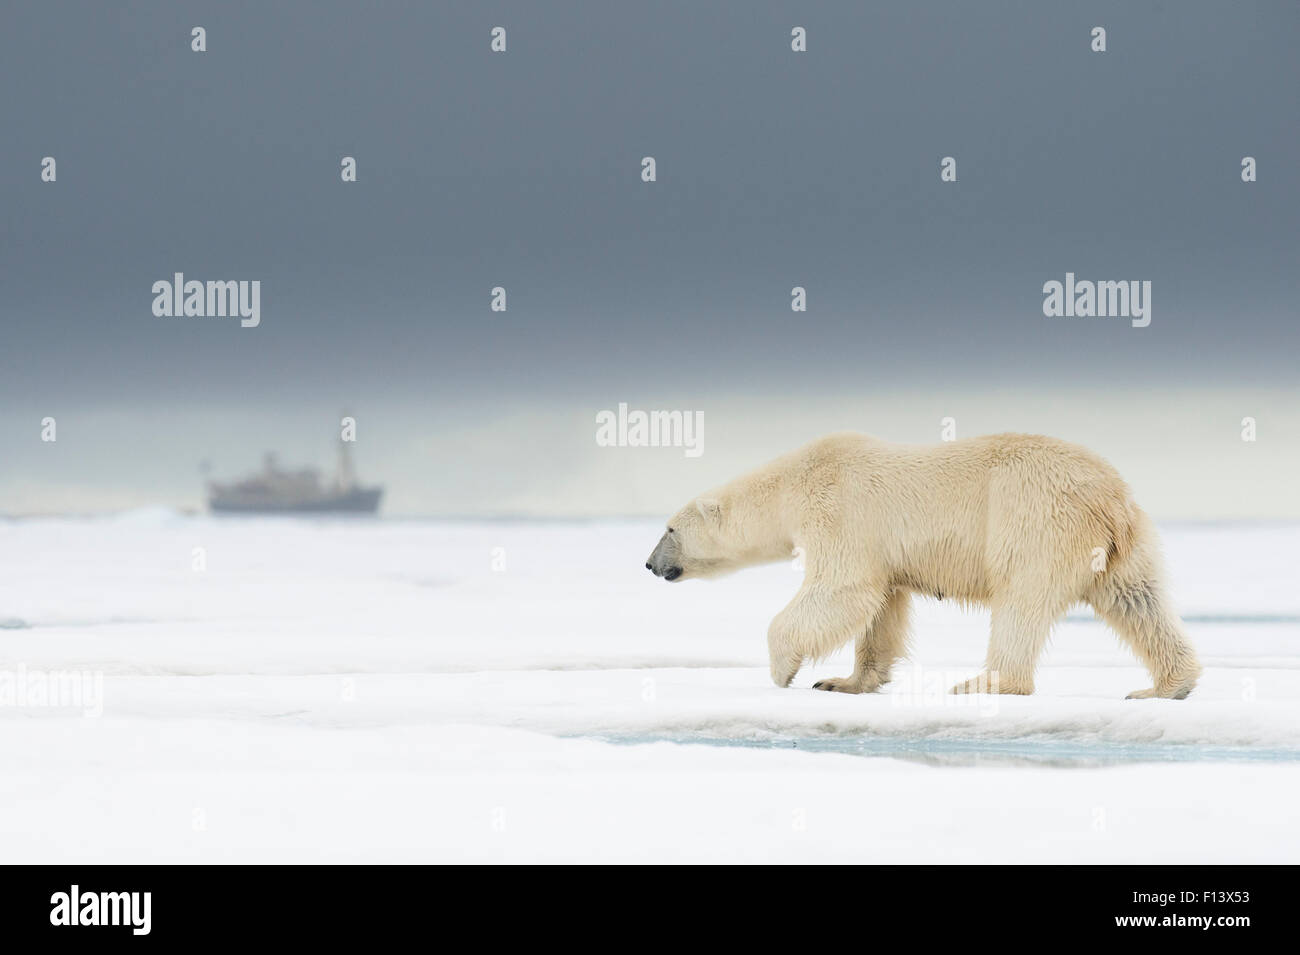 Female Polar bear (Ursus maritimus) walking on an ice floe with expedition ship MS Origo in the distance, Spitsbergen, Svalbard, Norway, July. Vulnerable Species. Stock Photo